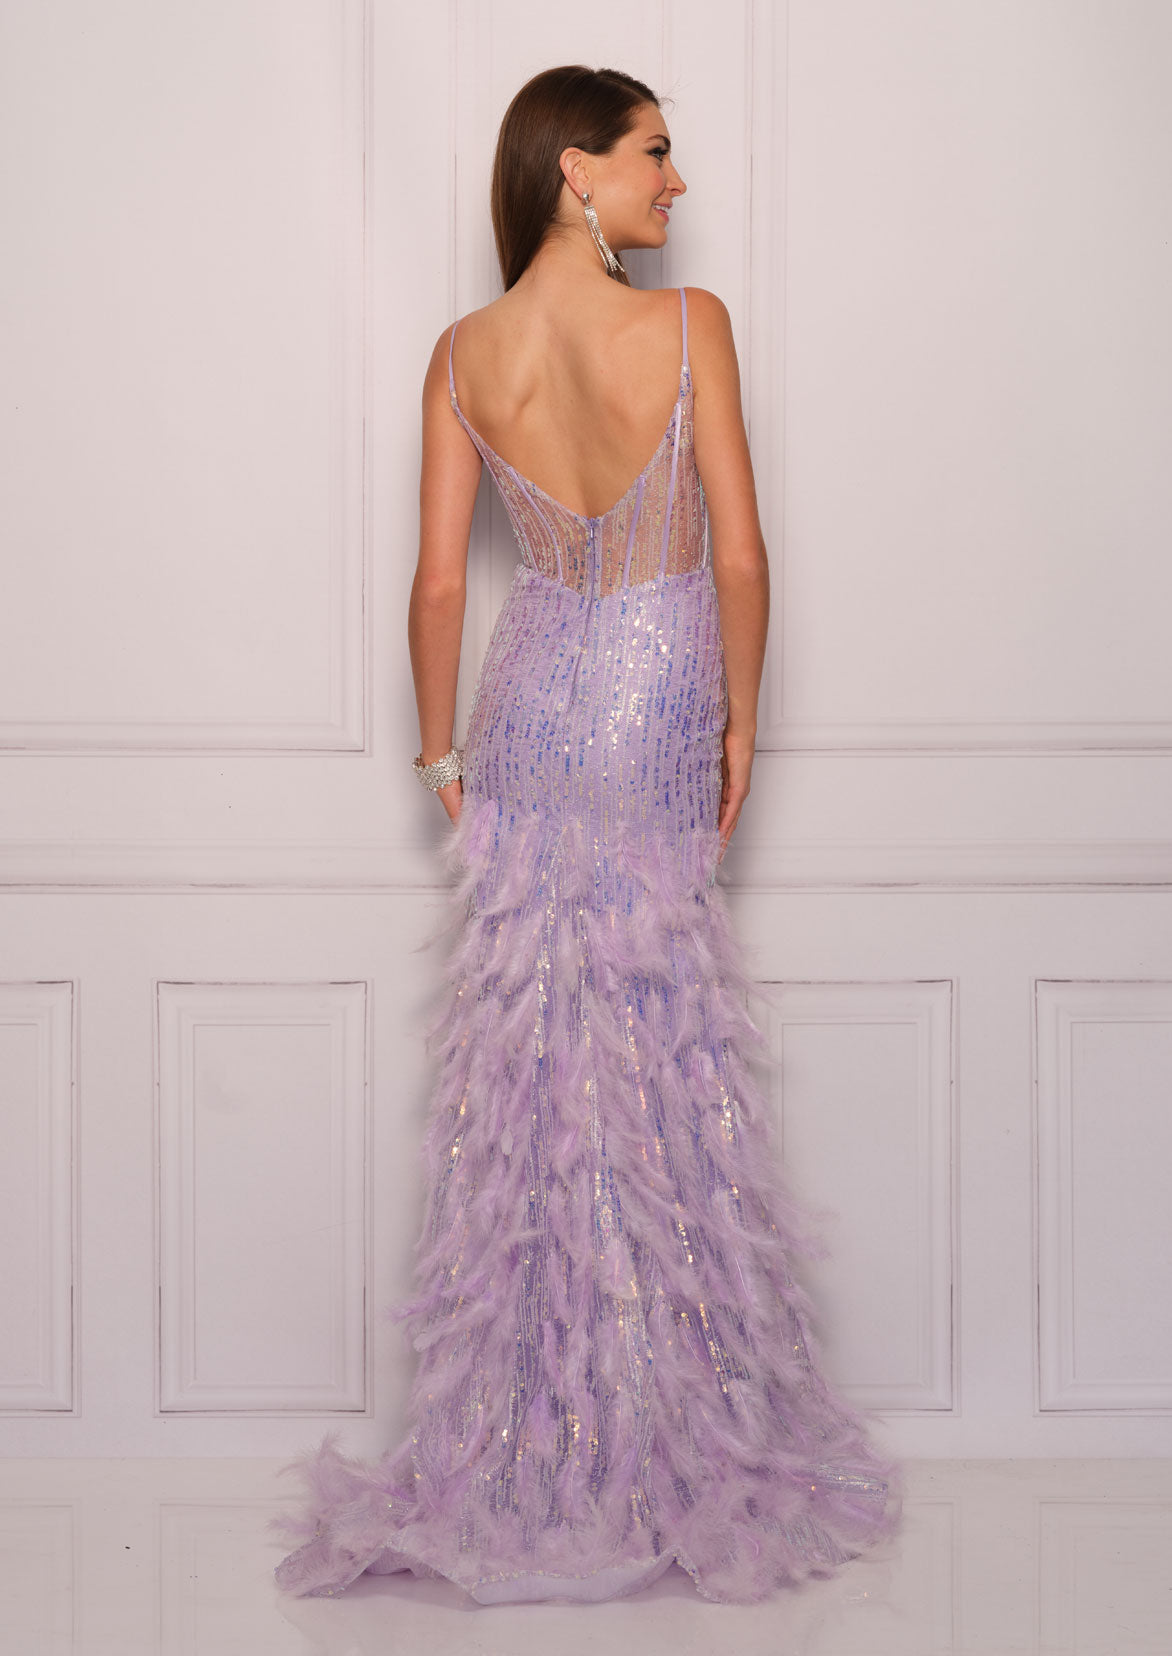 Dave & Johnny 11088 Long Fitted Sheer Sequin Slit Feather Corset Prom Dress Pageant Gown  Sizes: 0-16  Colors: Lilac